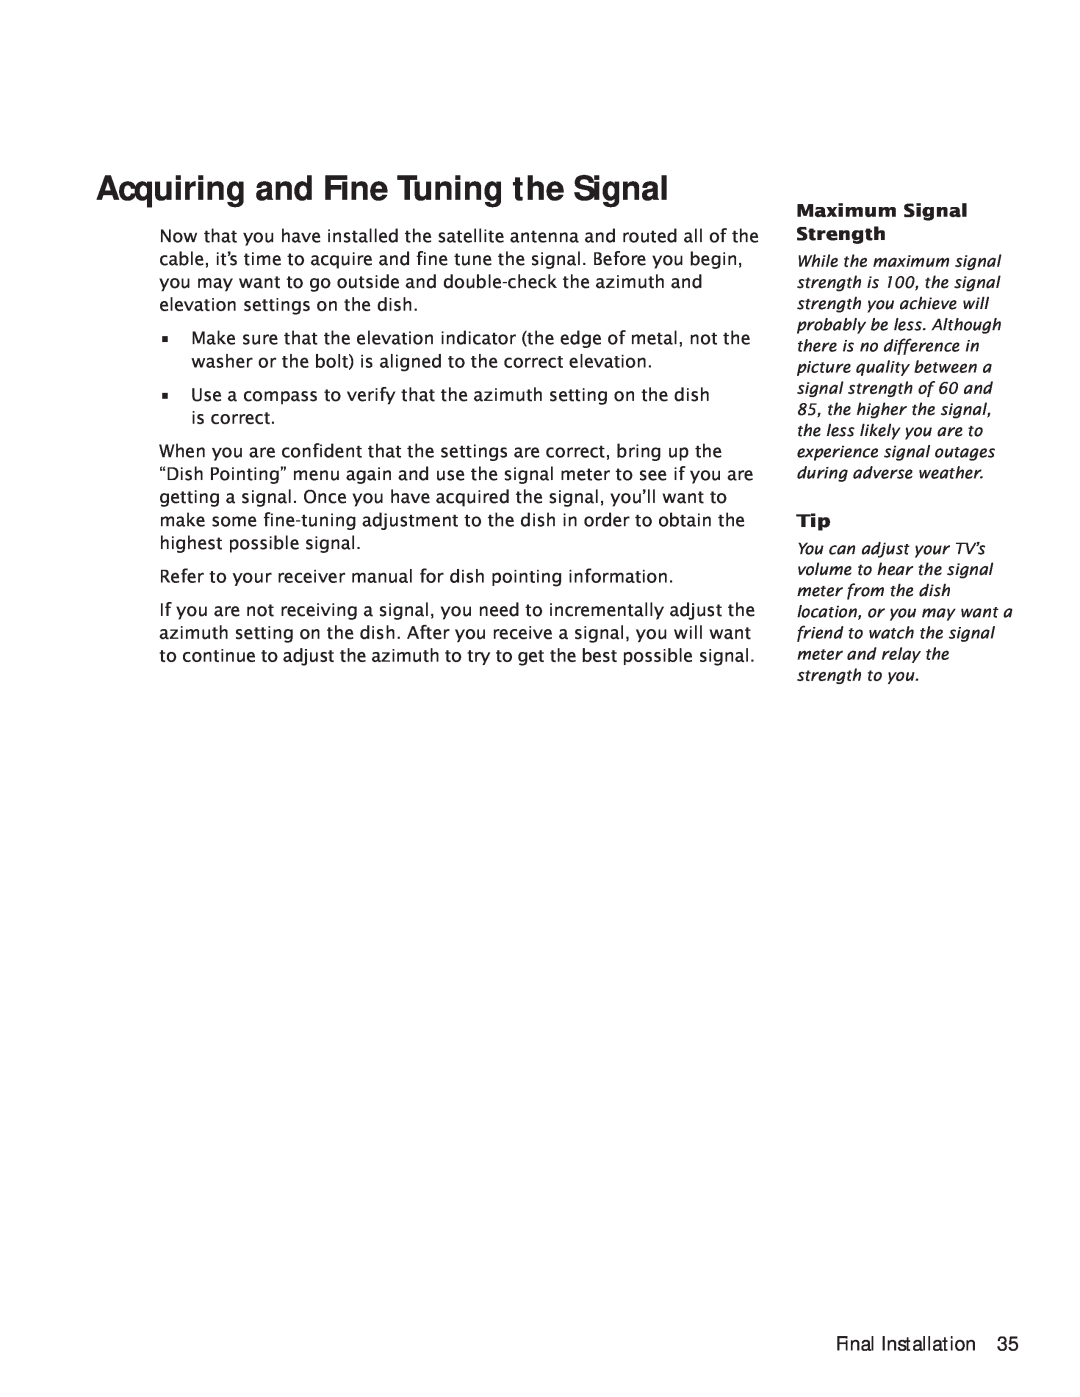 RCA Satellite TV Antenna manual Acquiring and Fine Tuning the Signal, Final Installation 